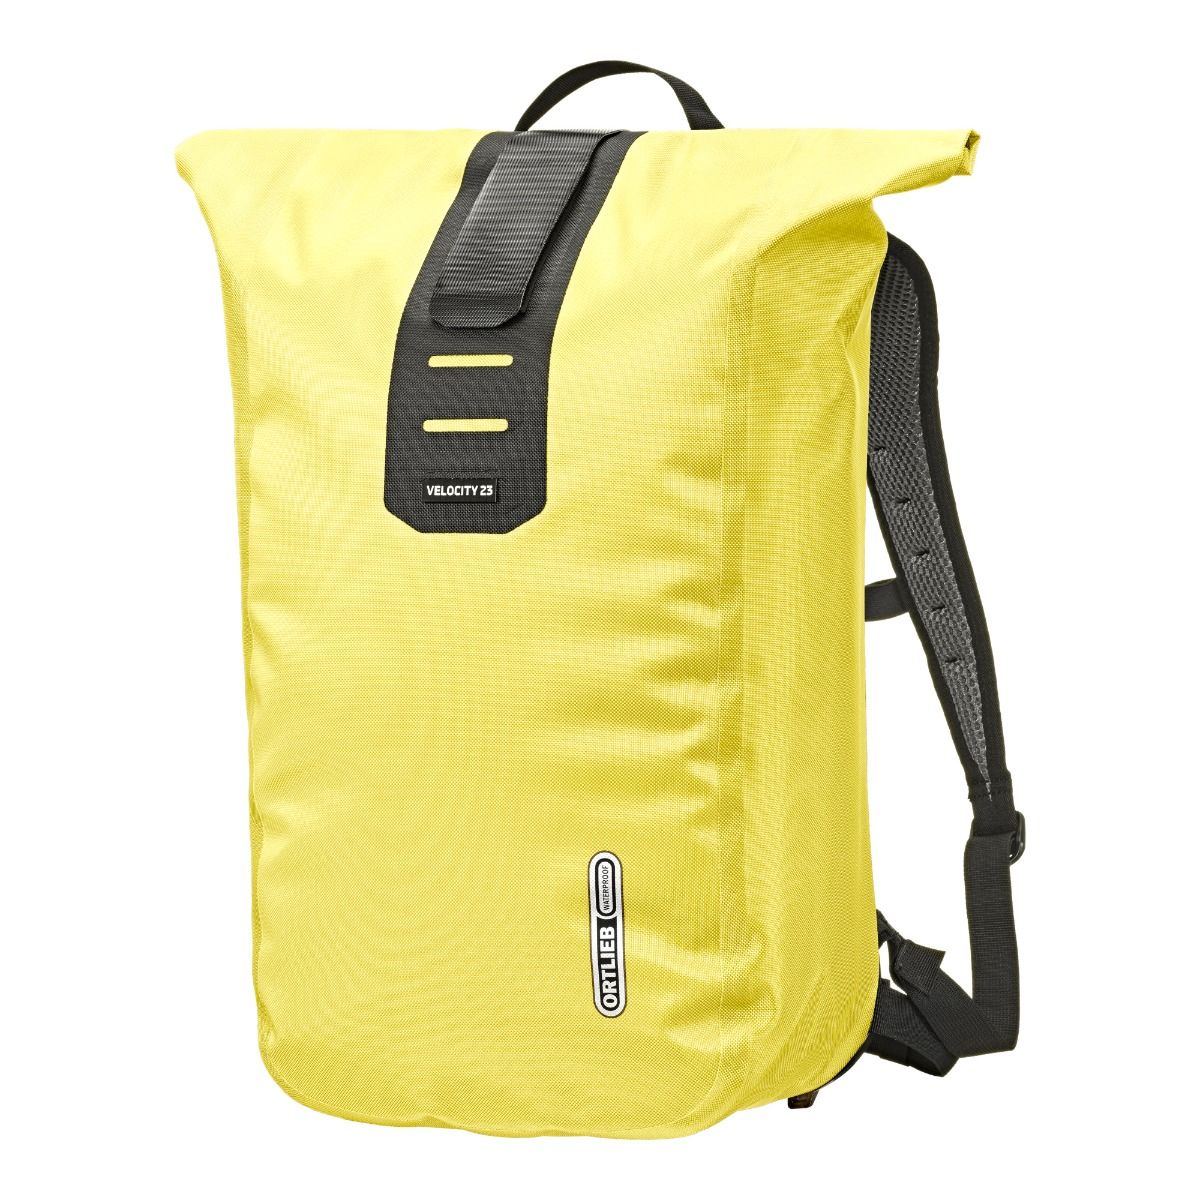 Ortlieb Velocity PS - Cycling backpack